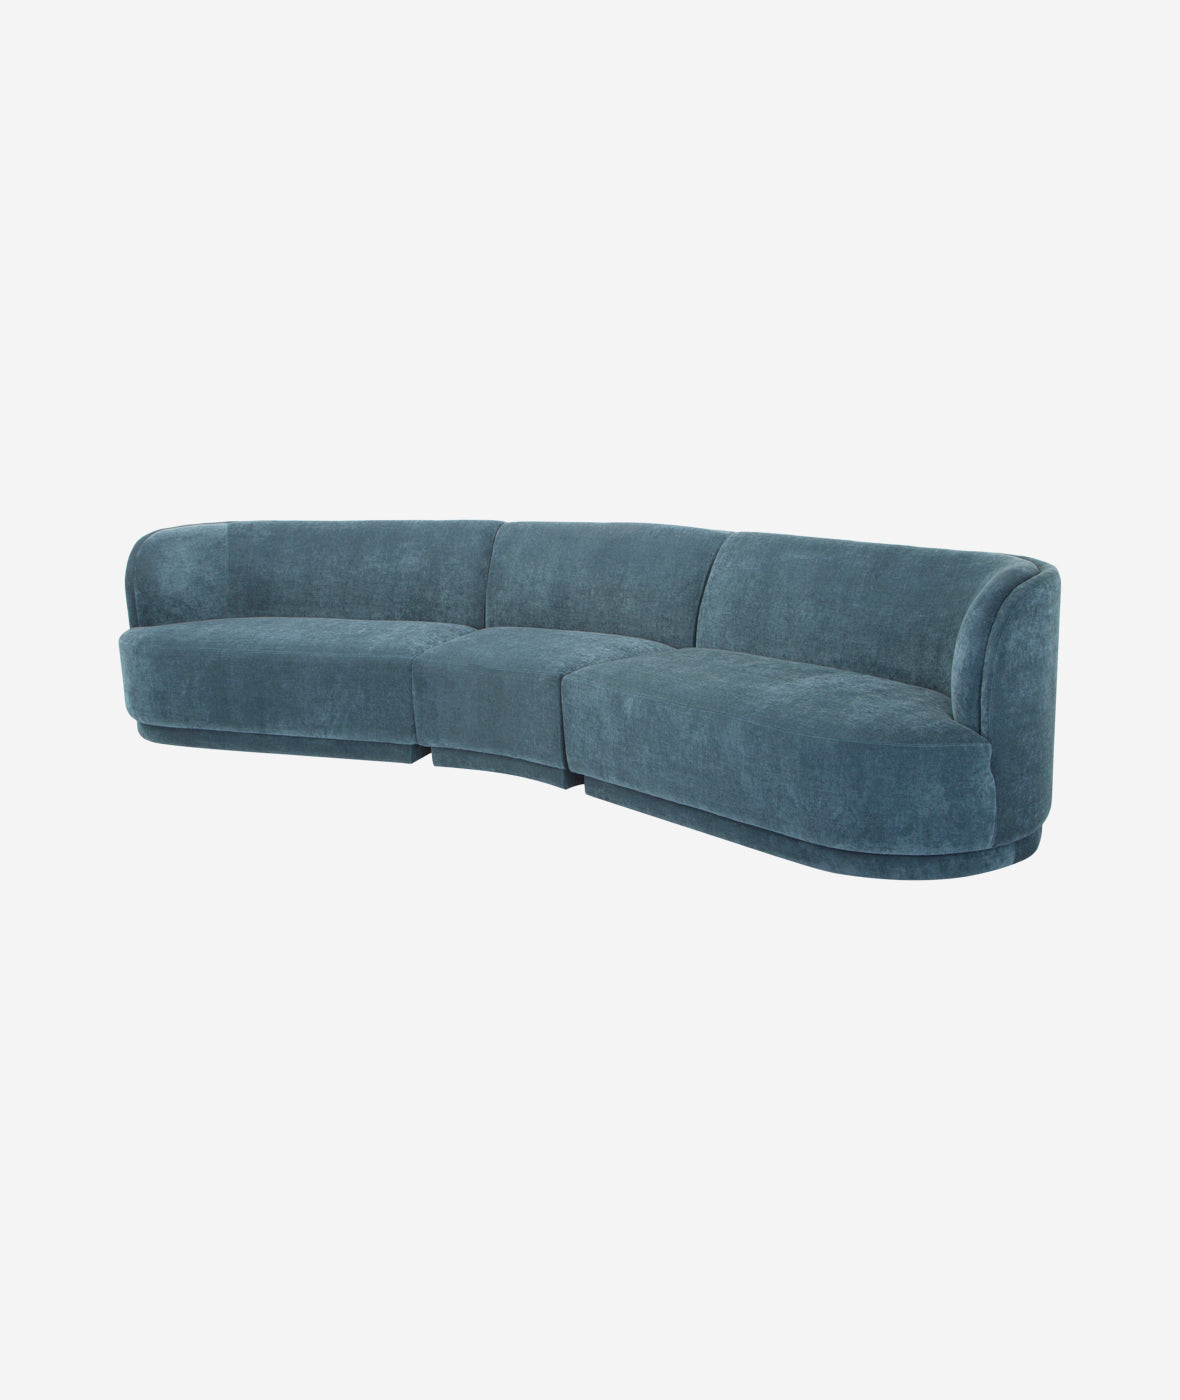 Yoon Compass Sectional - Nightshade Blue